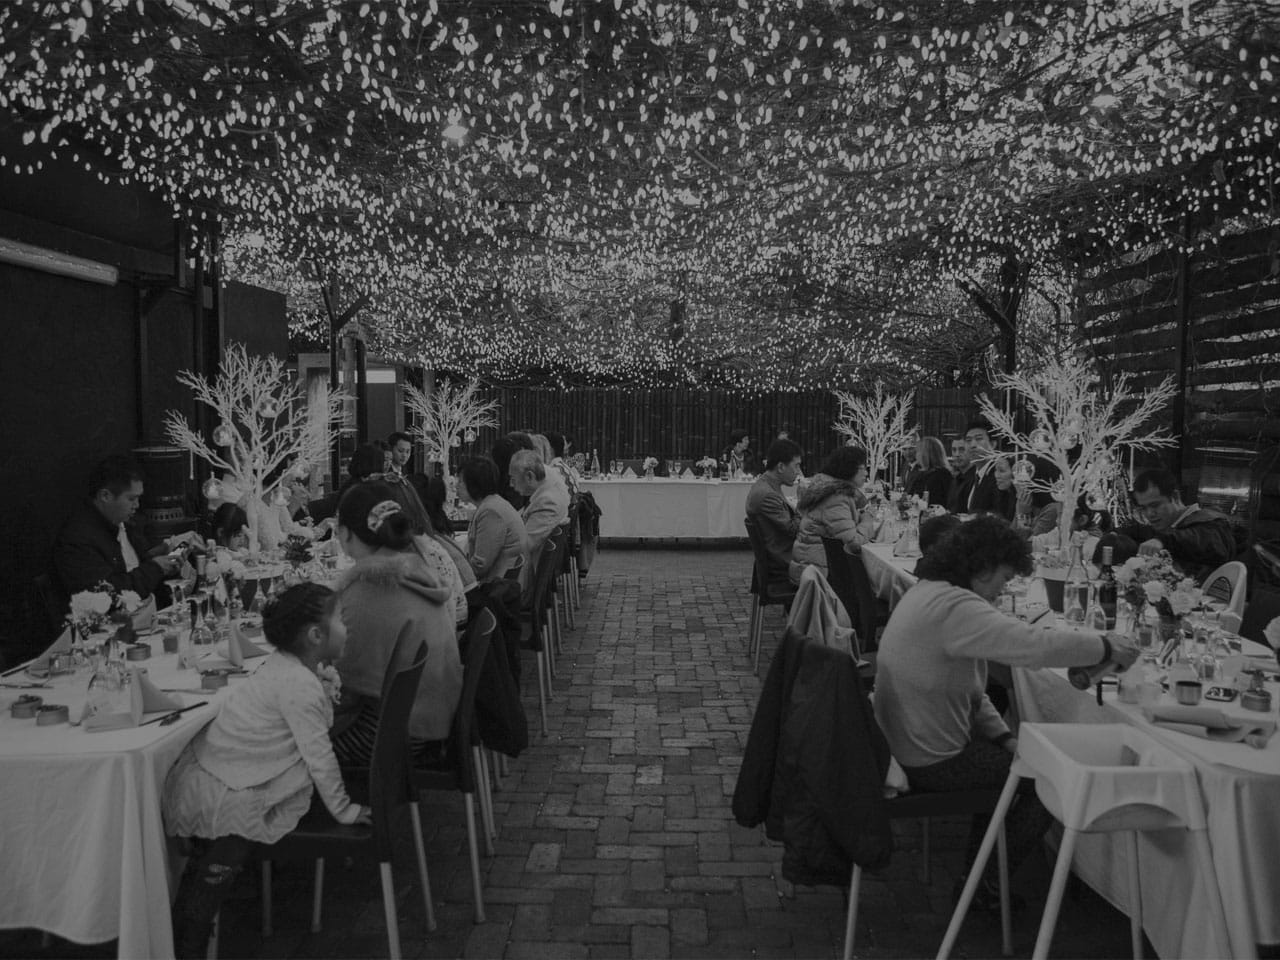 Guests Seated In Long Tables In The Open Air Function Space With String Lights Above Them